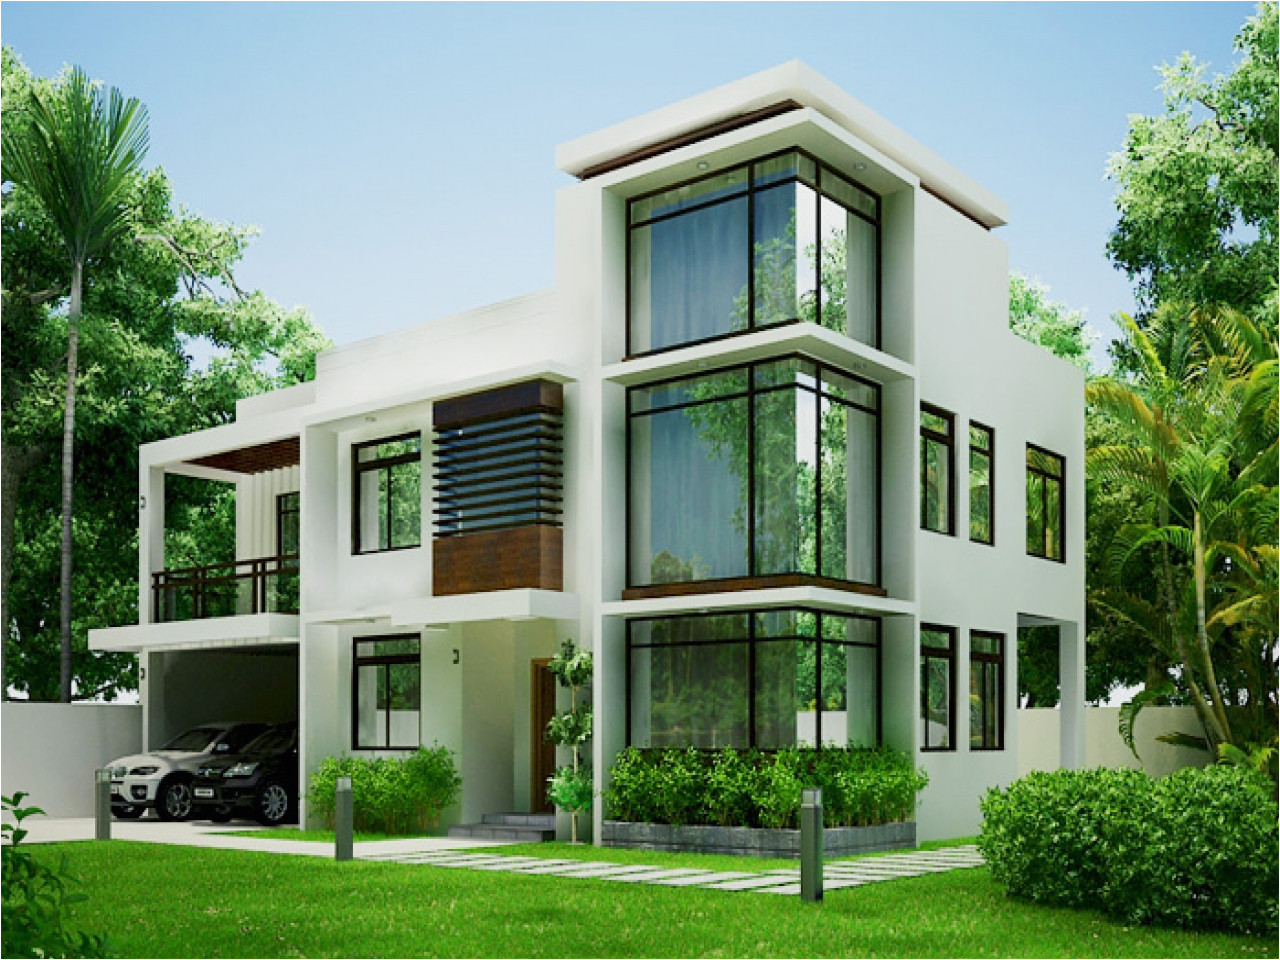 3b6d4ed23f2075ce small modern contemporary homes small modern home design houses